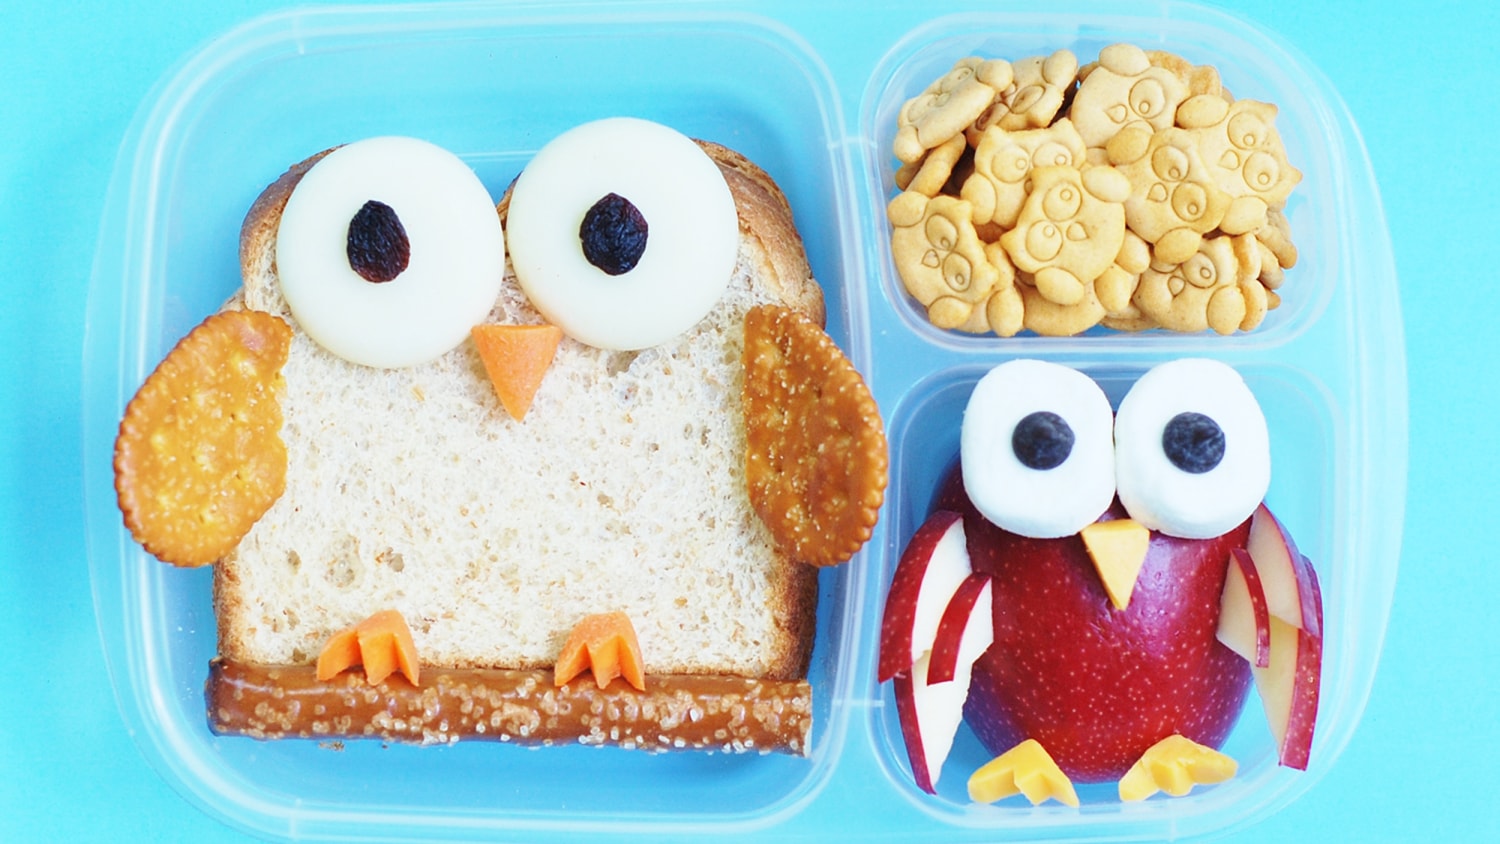 Creative Lunch Box Ideas to Brighten Your Day